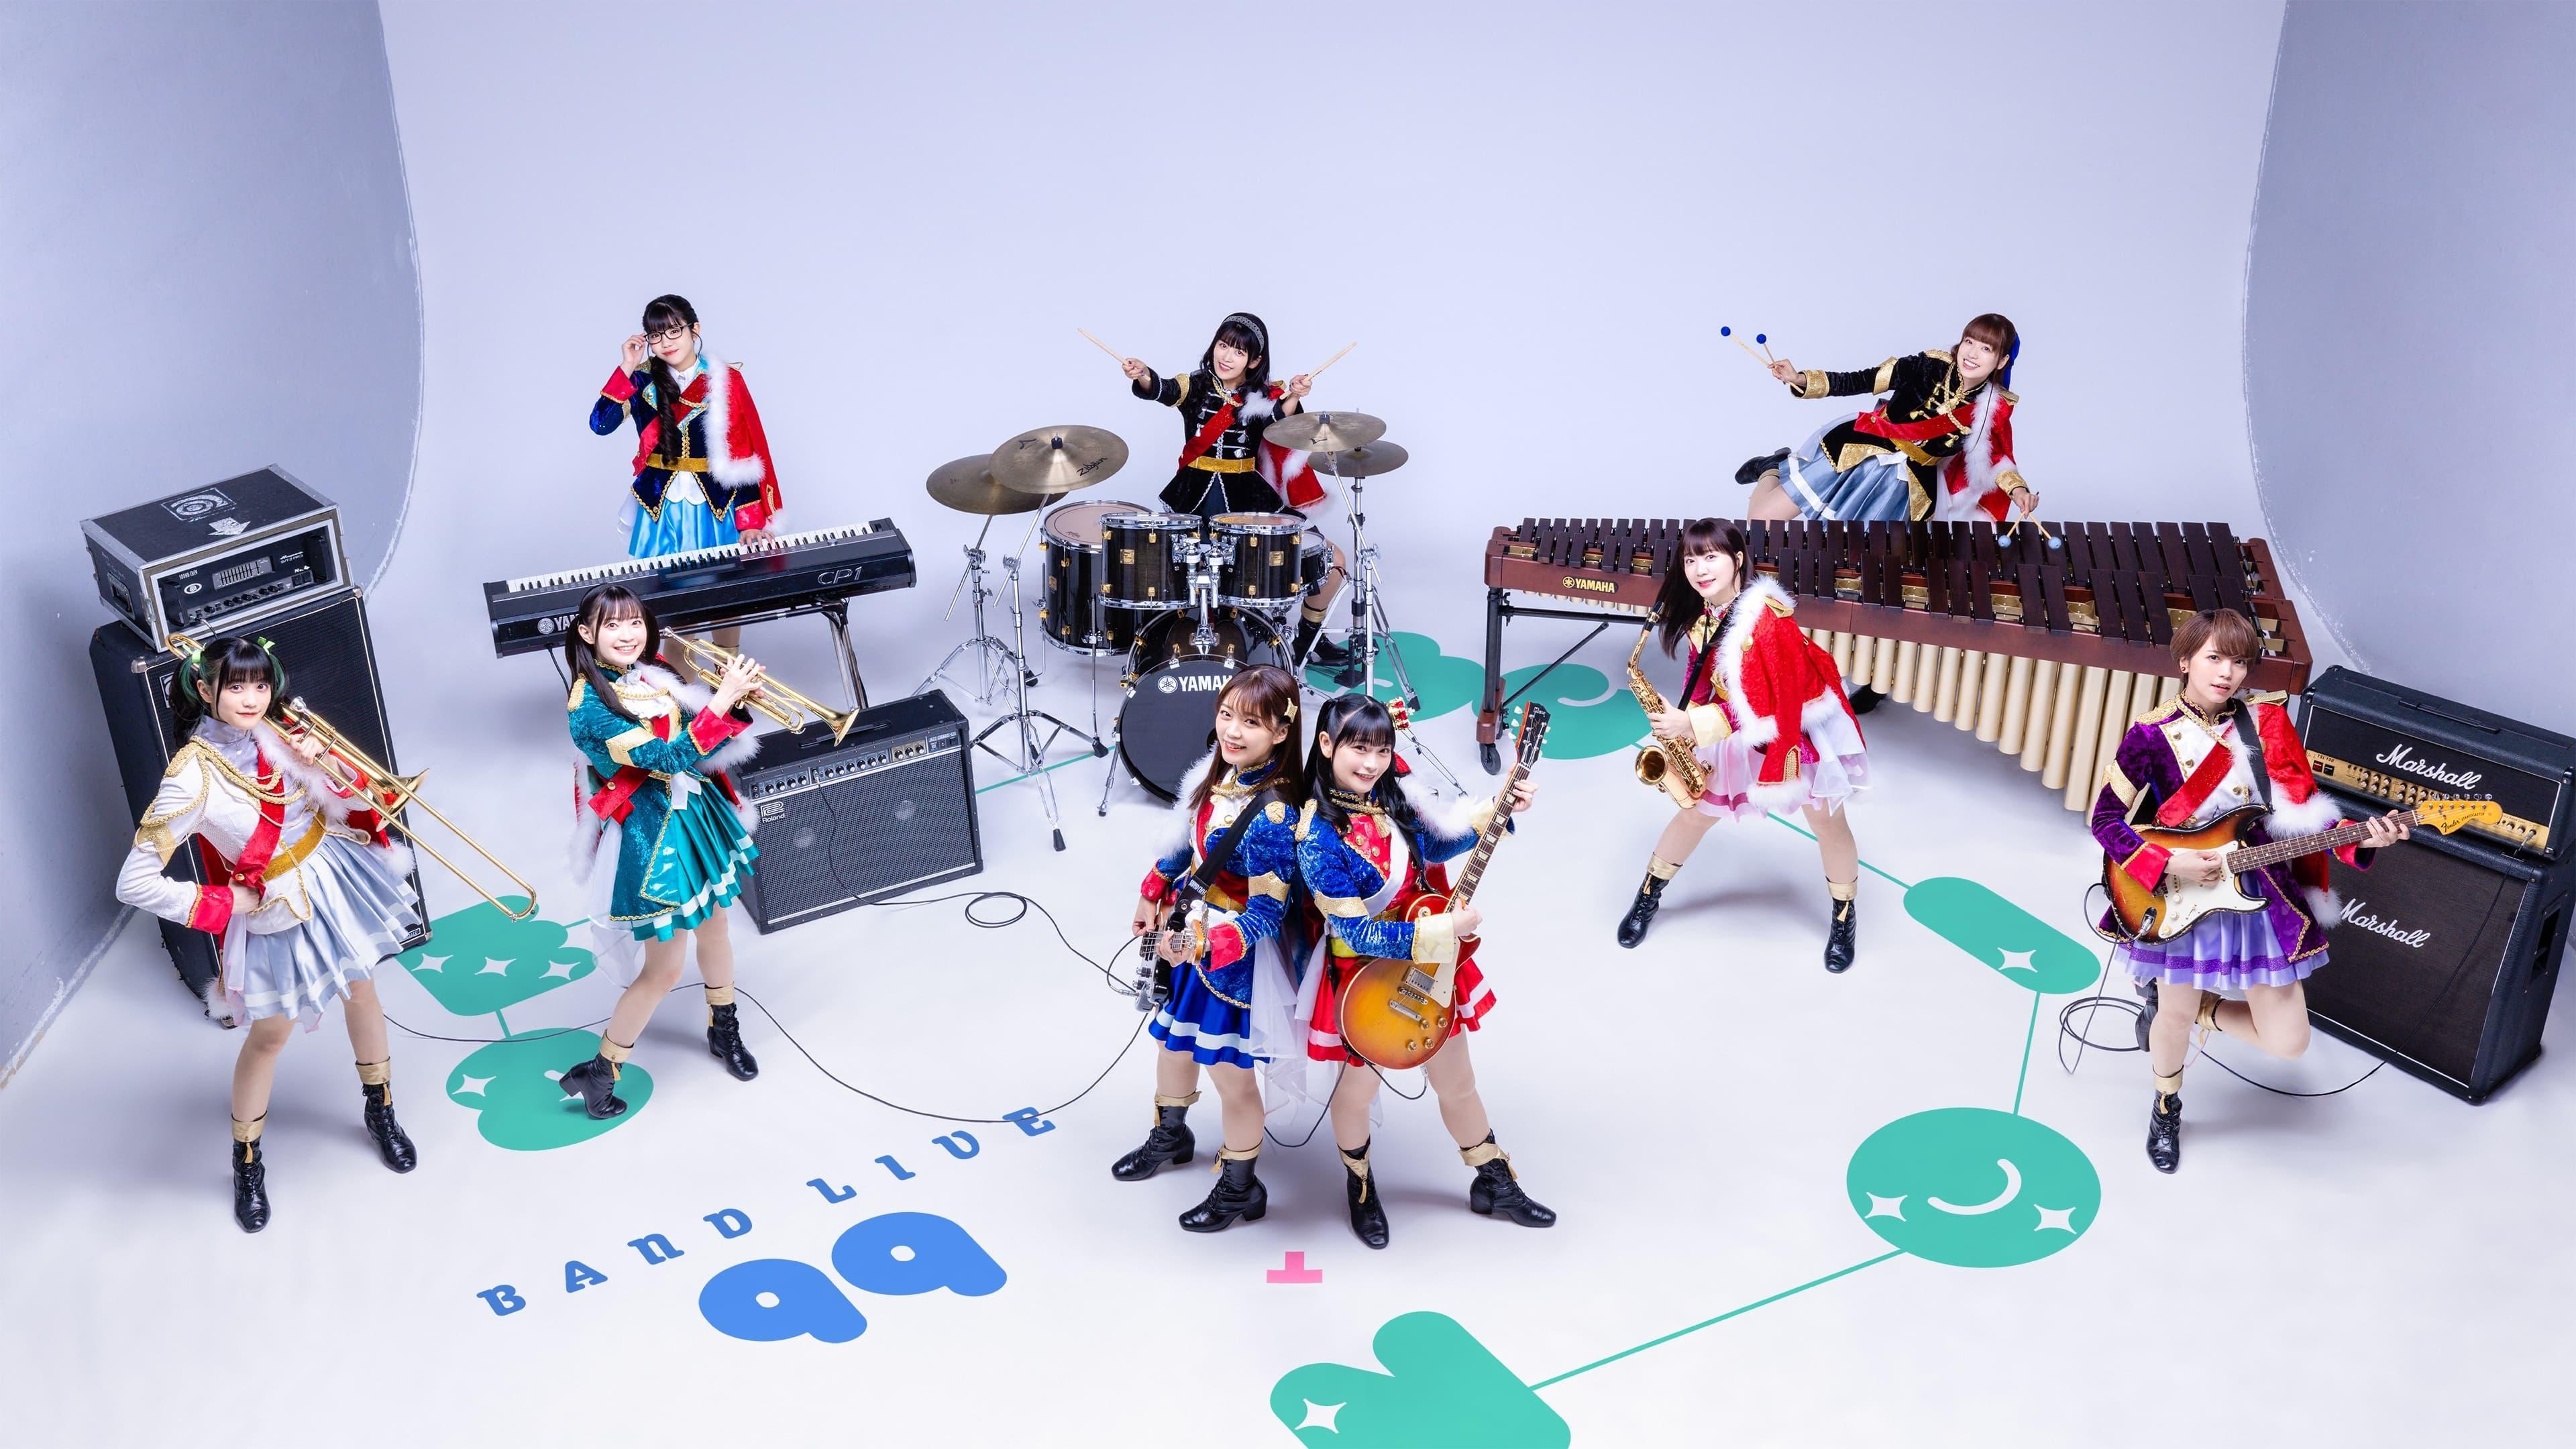 Revue Starlight Band Live "Starry Session" backdrop